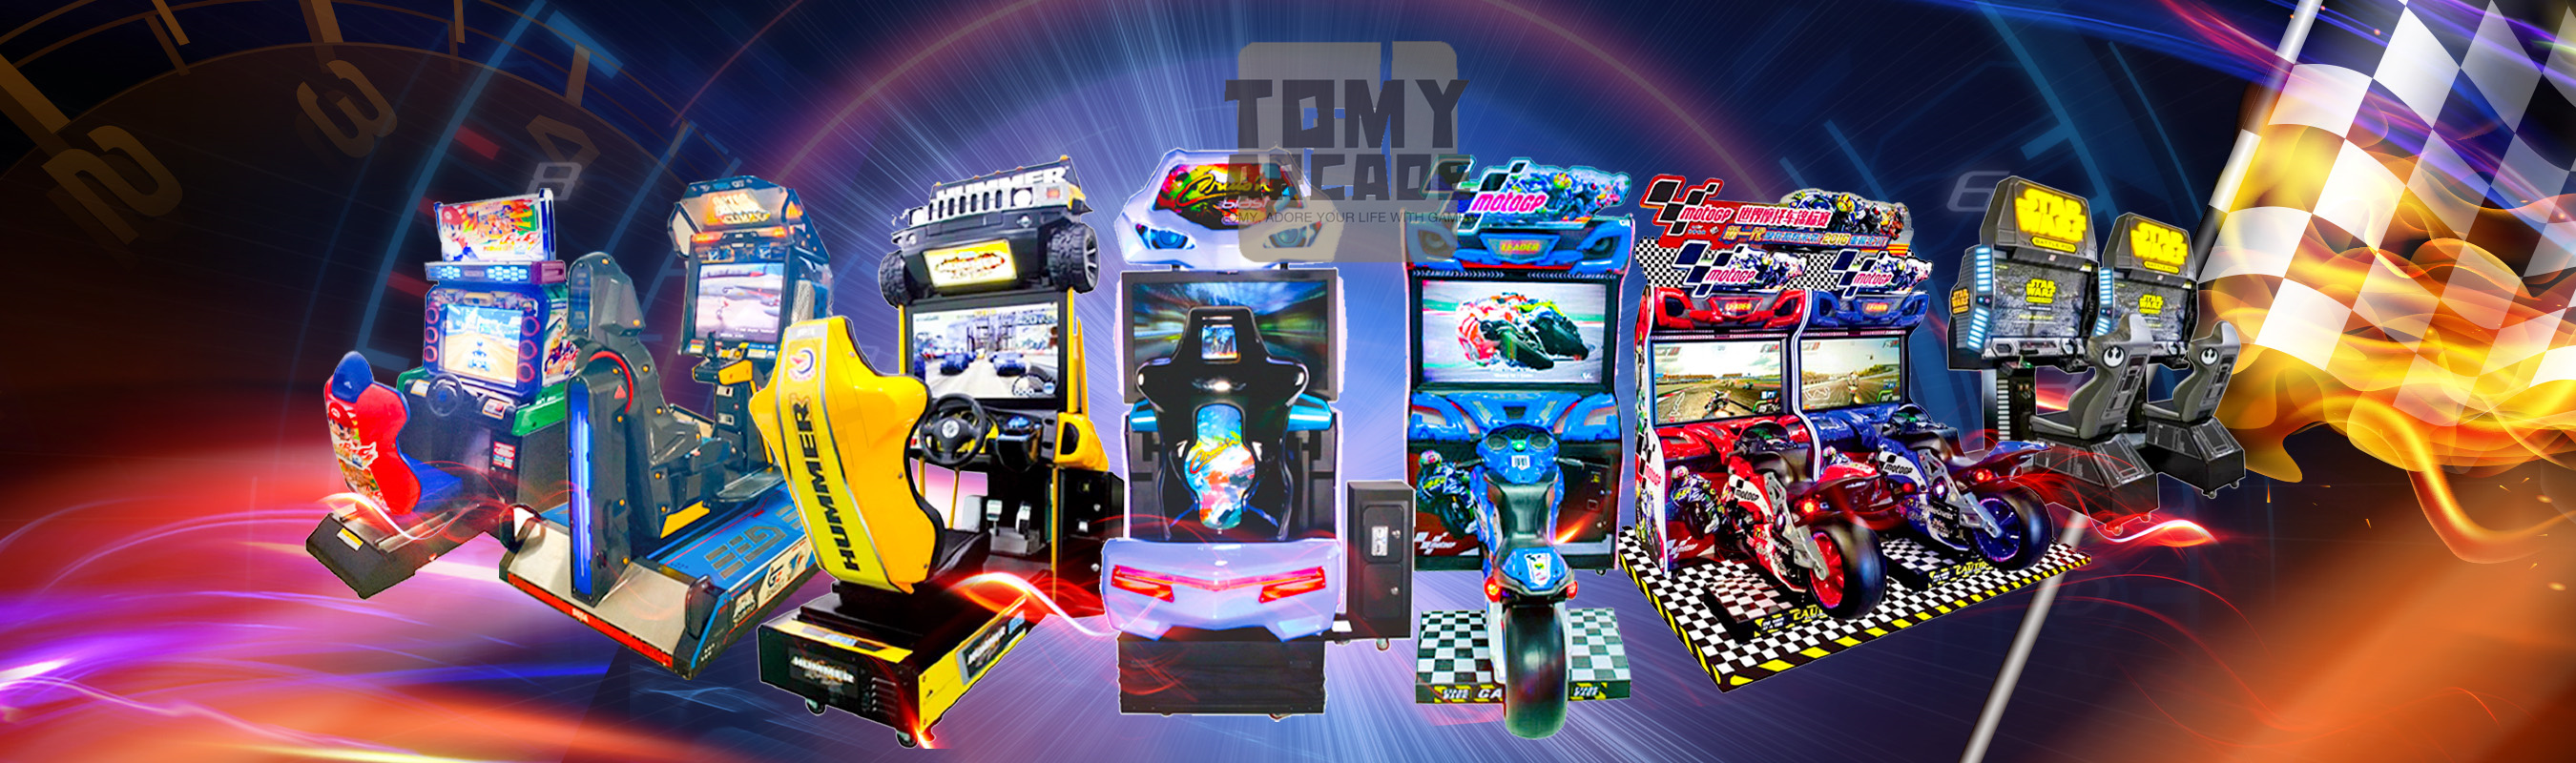 Driving Arcade Racing Game for Sale Tomy Arcade